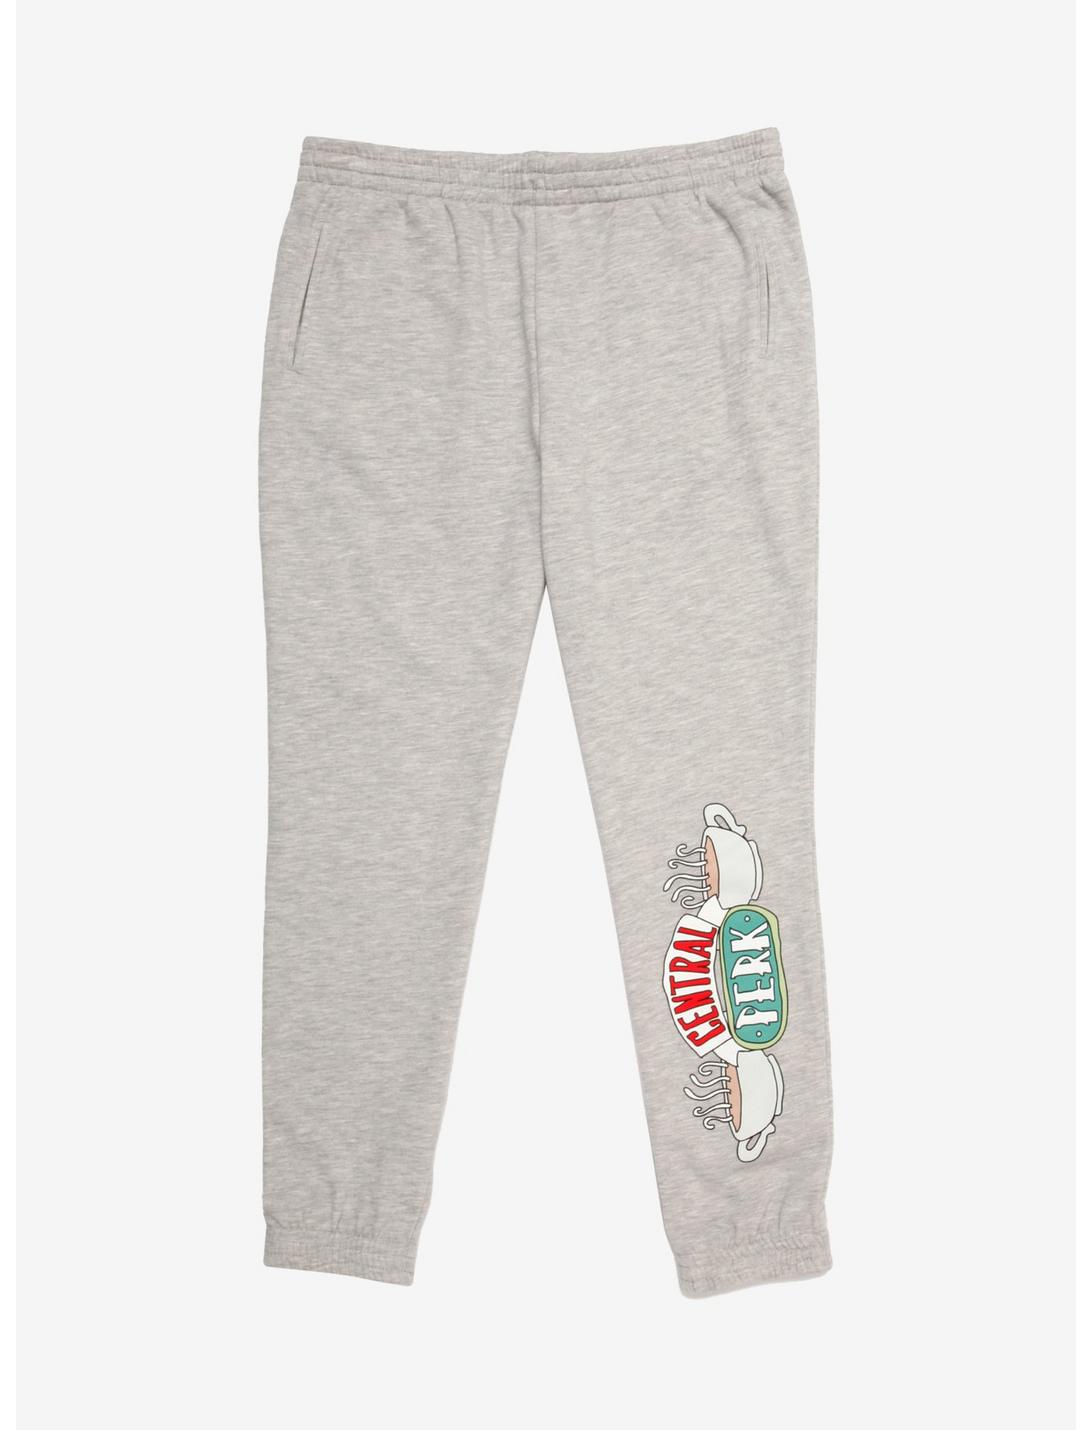 Friends Central Perk Gray Joggers - BoxLunch Exclusive | BoxLunch